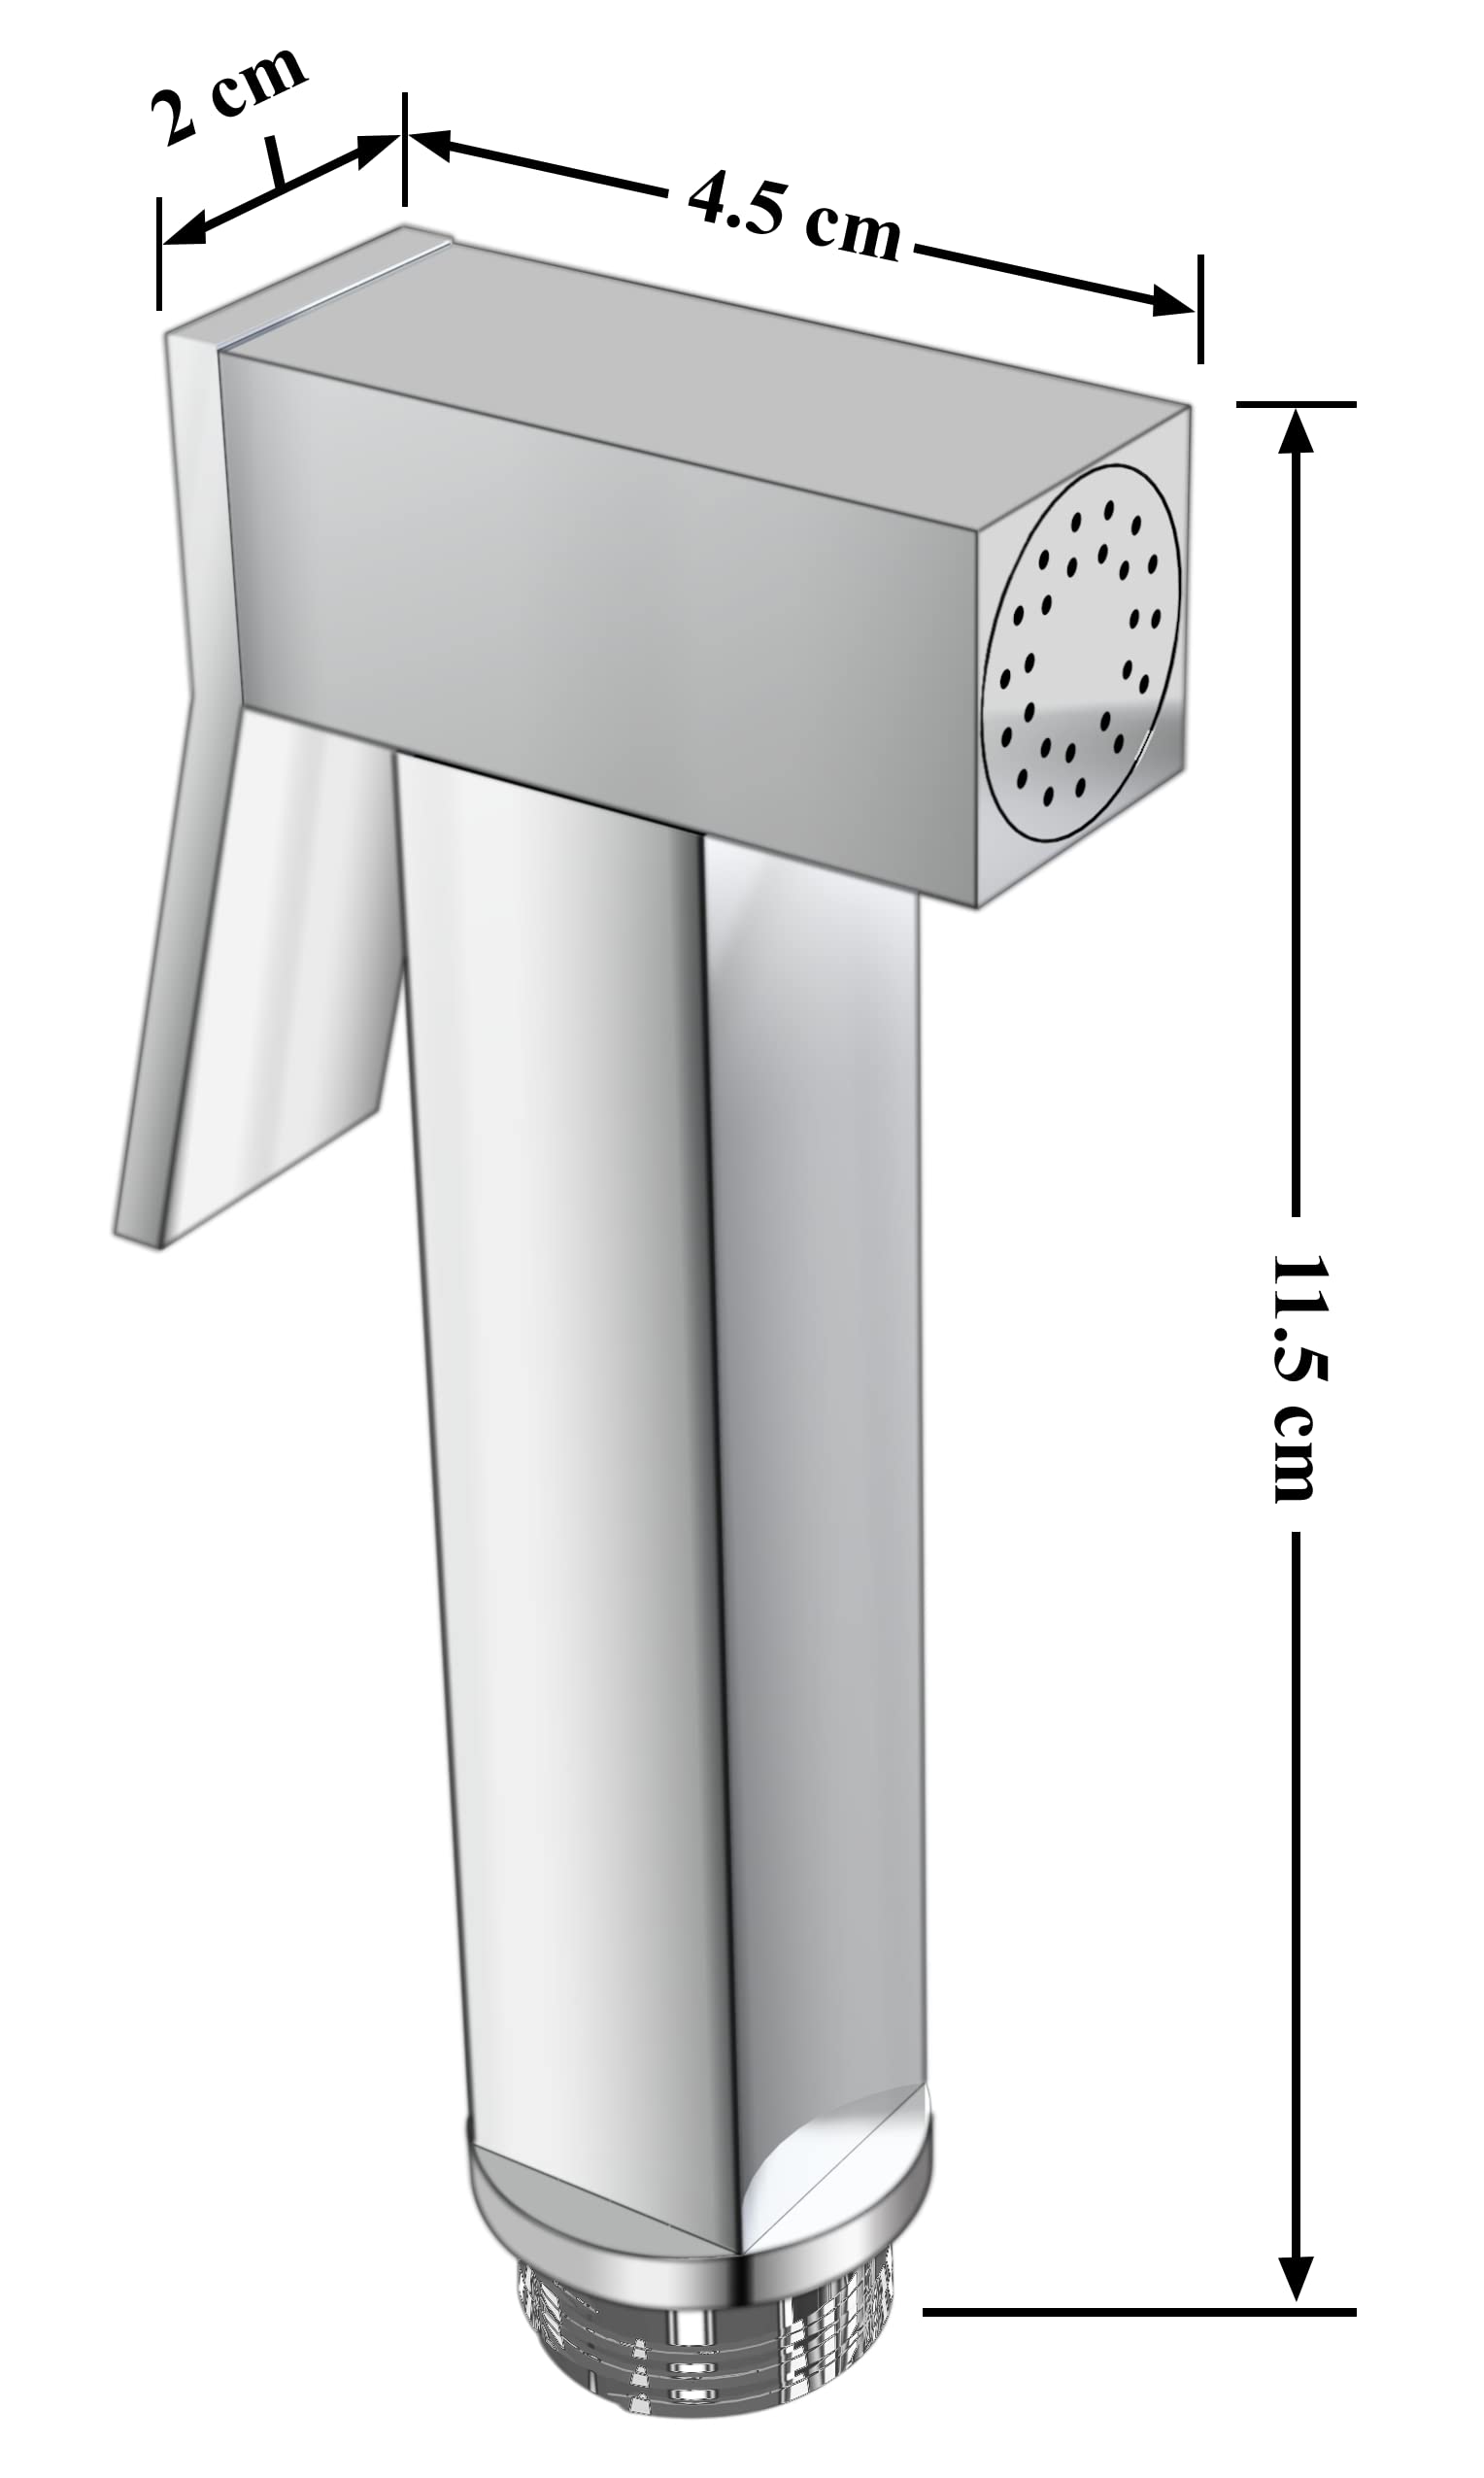 Plantex Health Faucet Without Hose Pipe and Wall Hook/Jet Spray for Toilet - 2